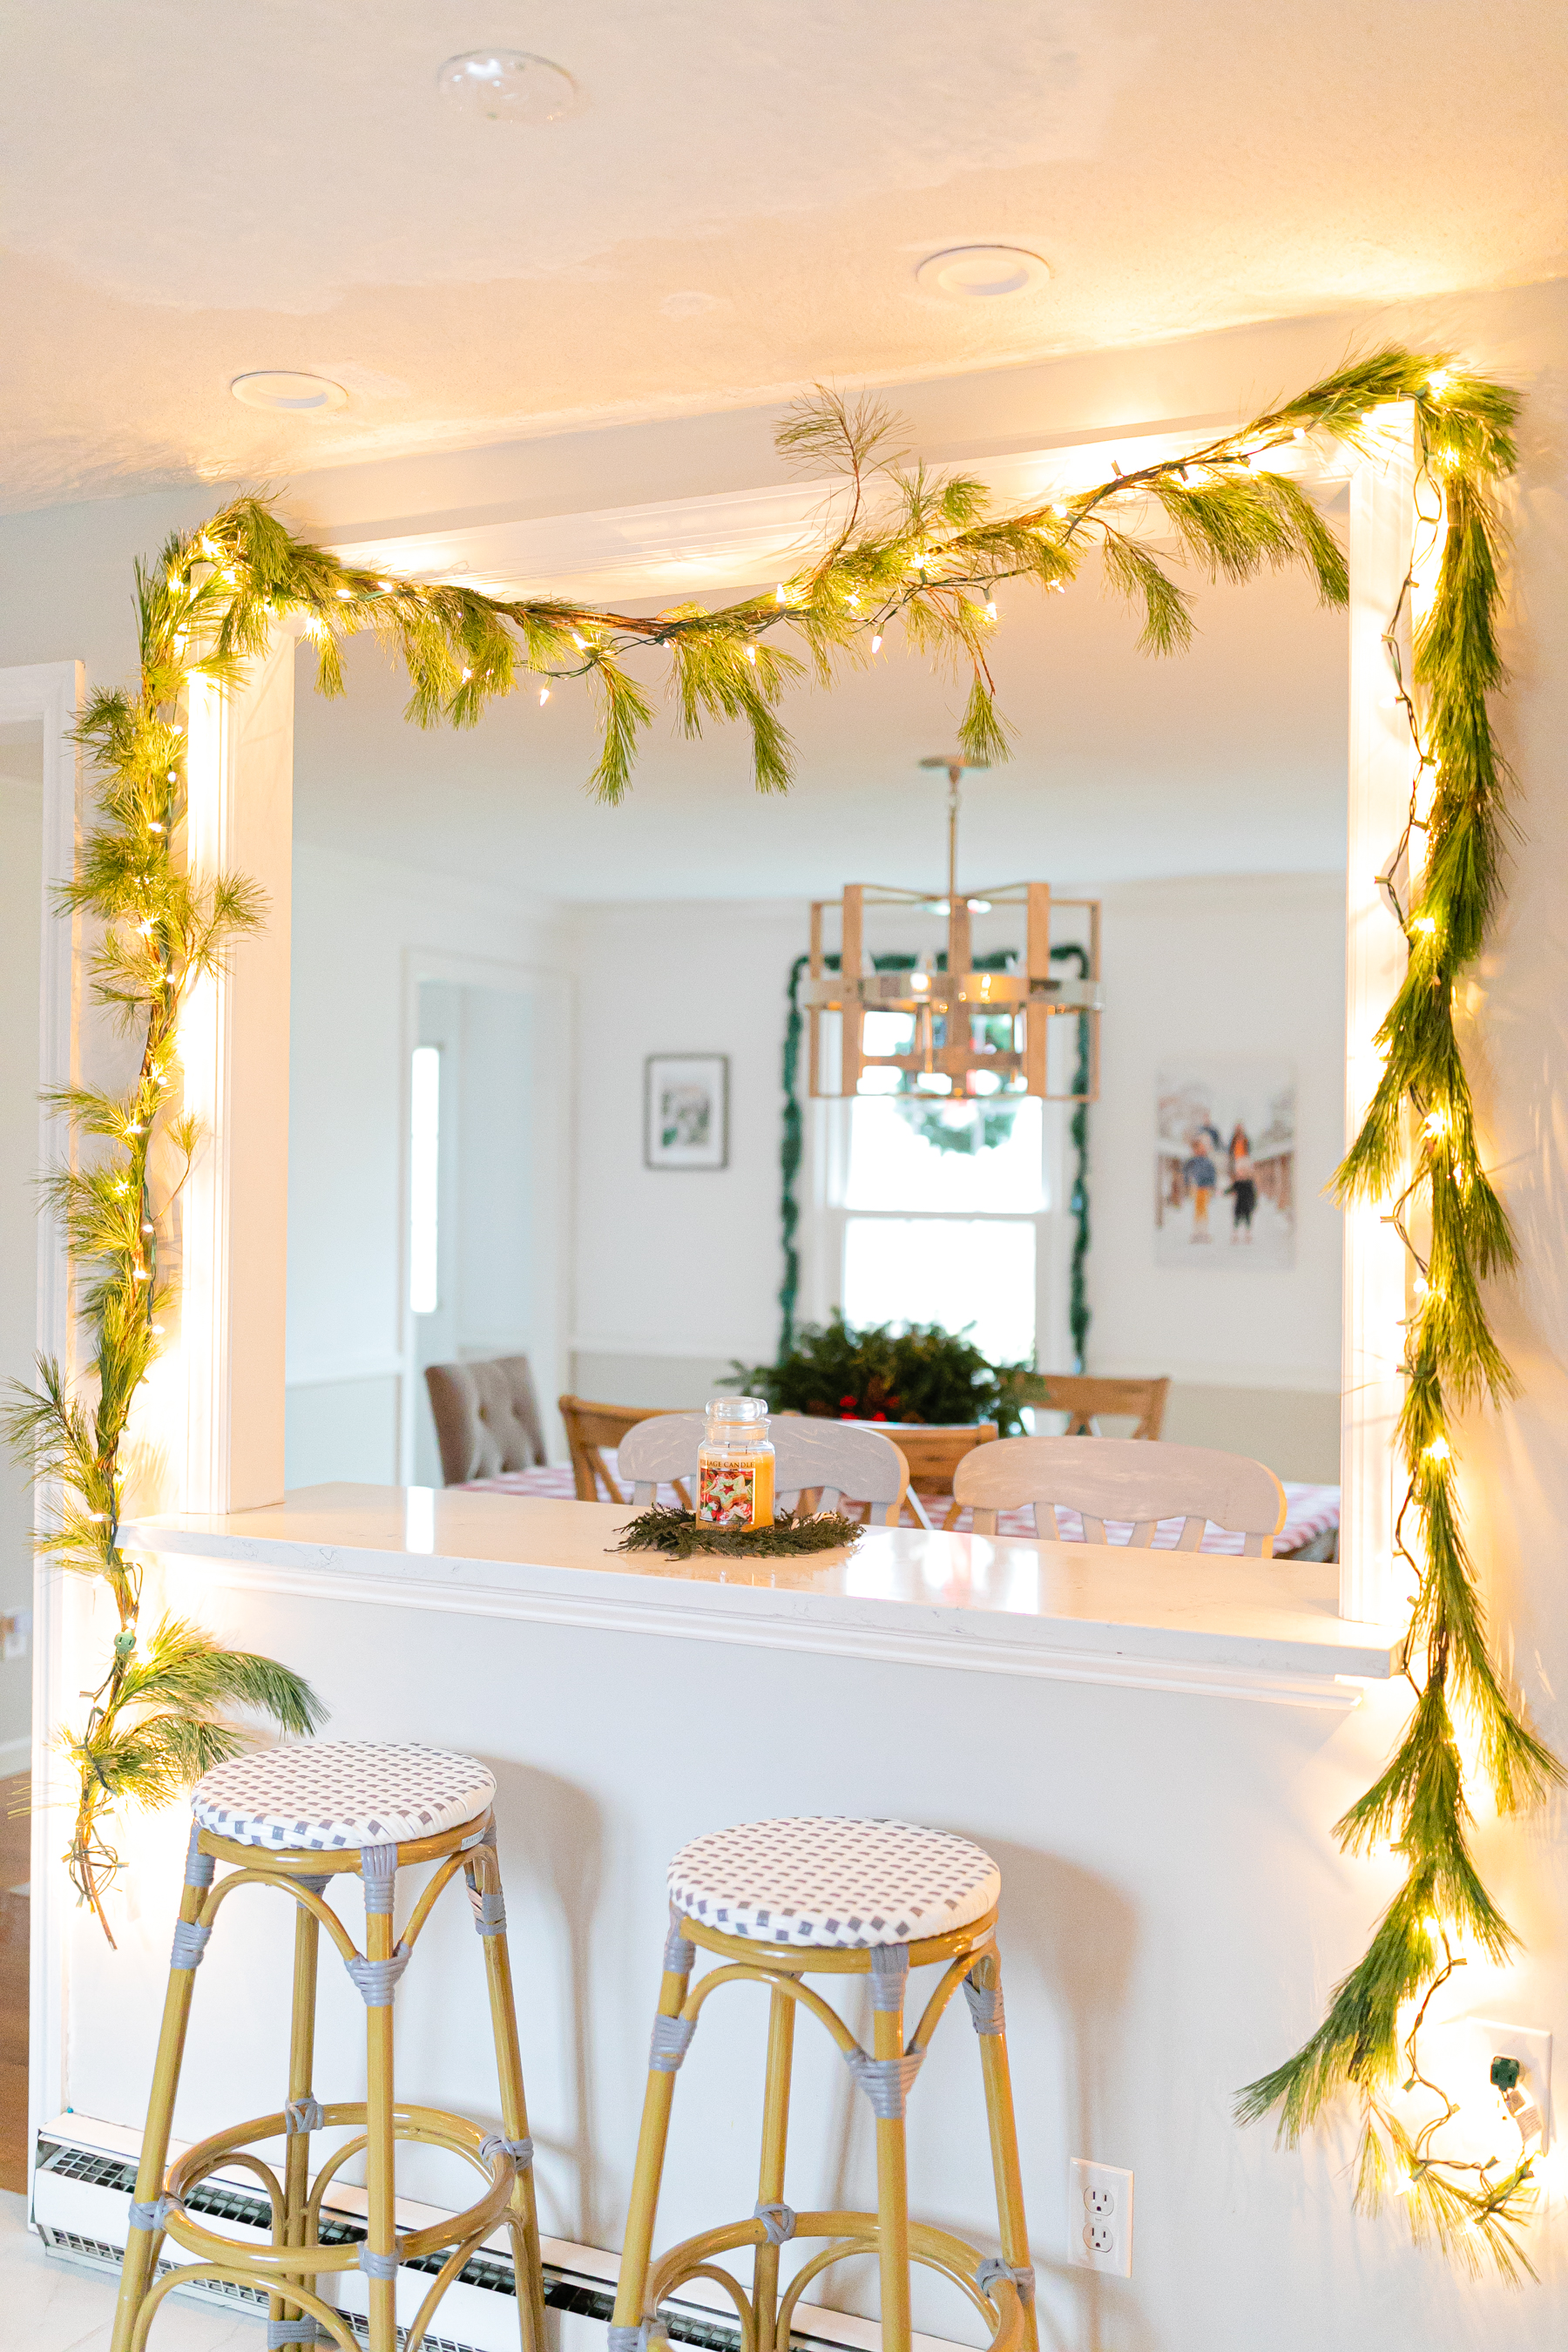 real garland above breakfast area in kitchen